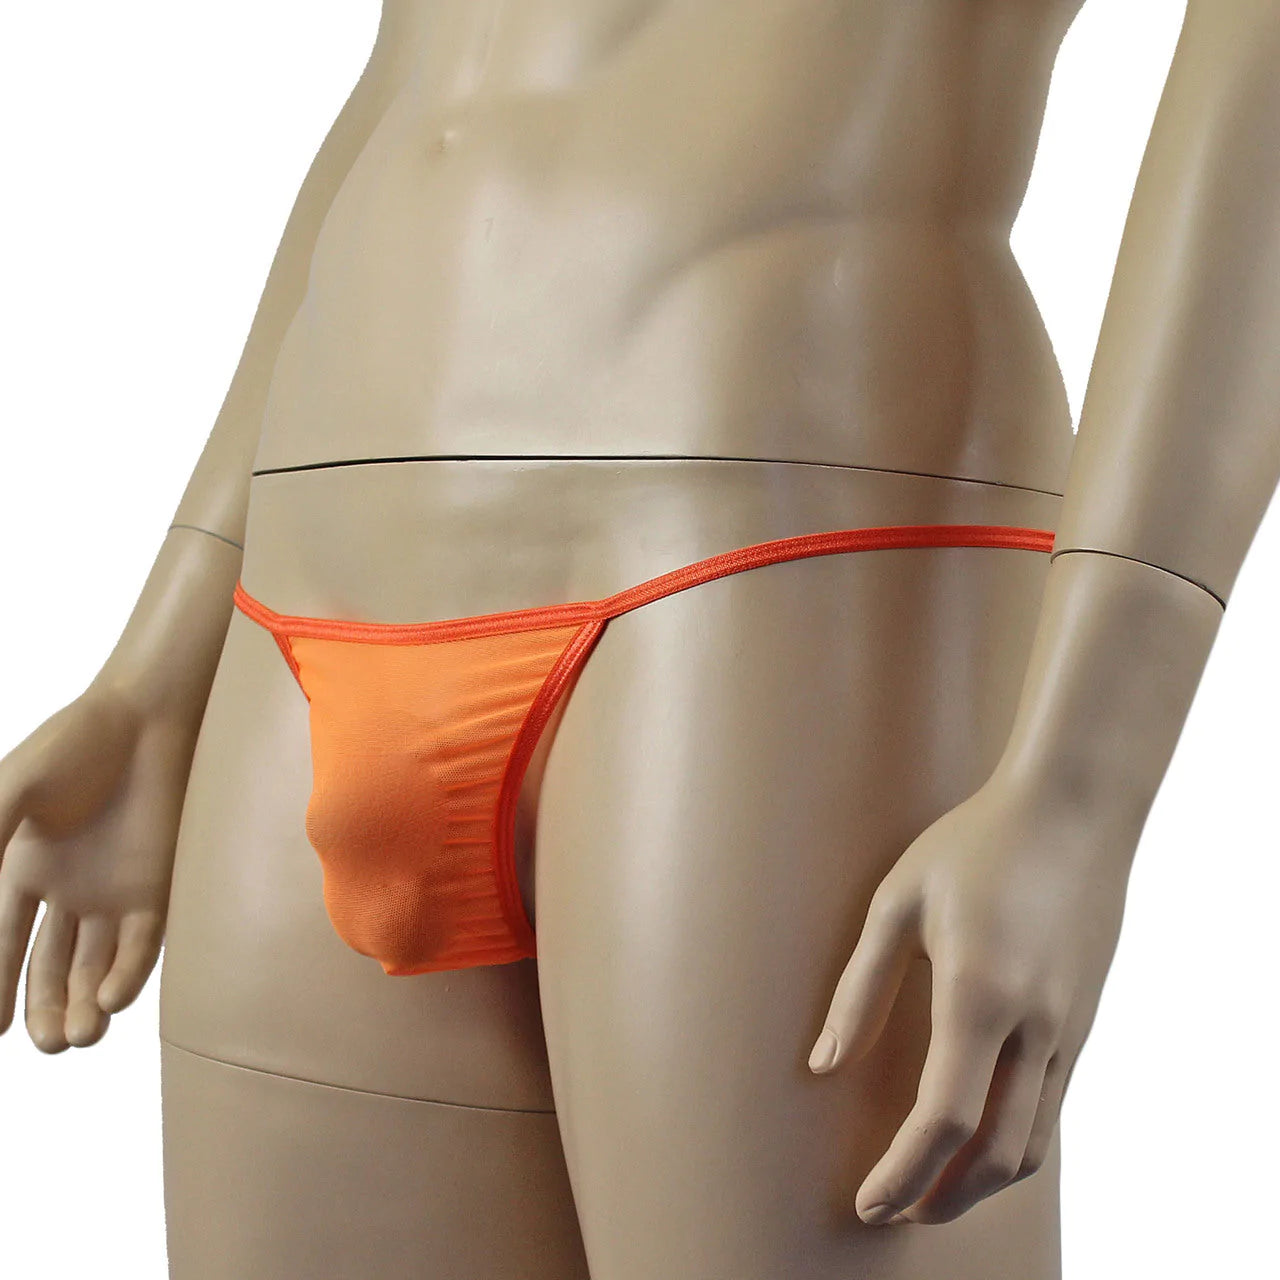 SALE - Mens Vicky See Through Sheer Mesh Pouch G string Orange